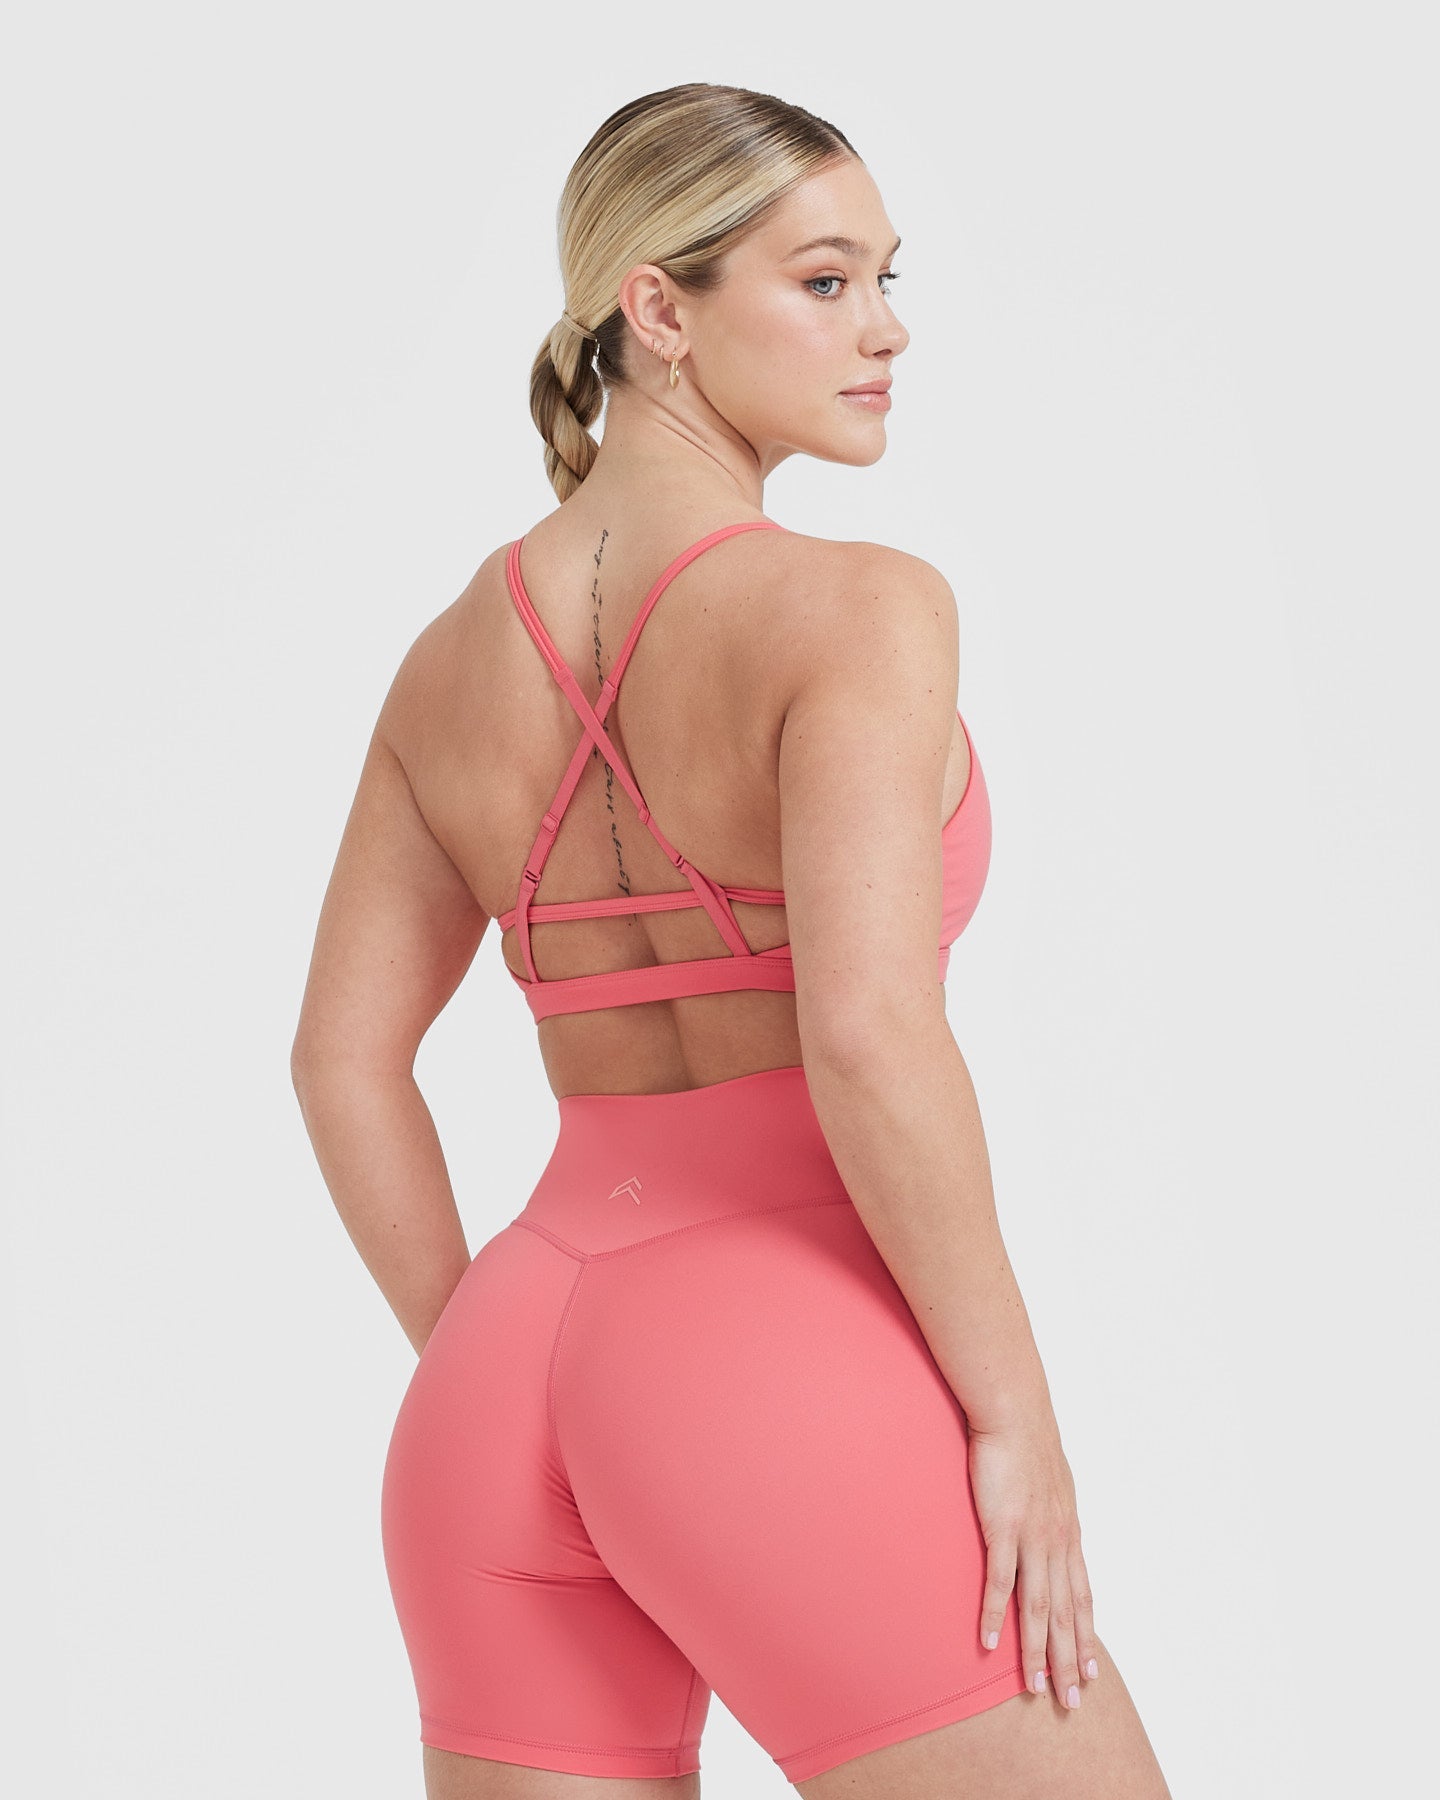 Cotton:On active strappy bralette in pink